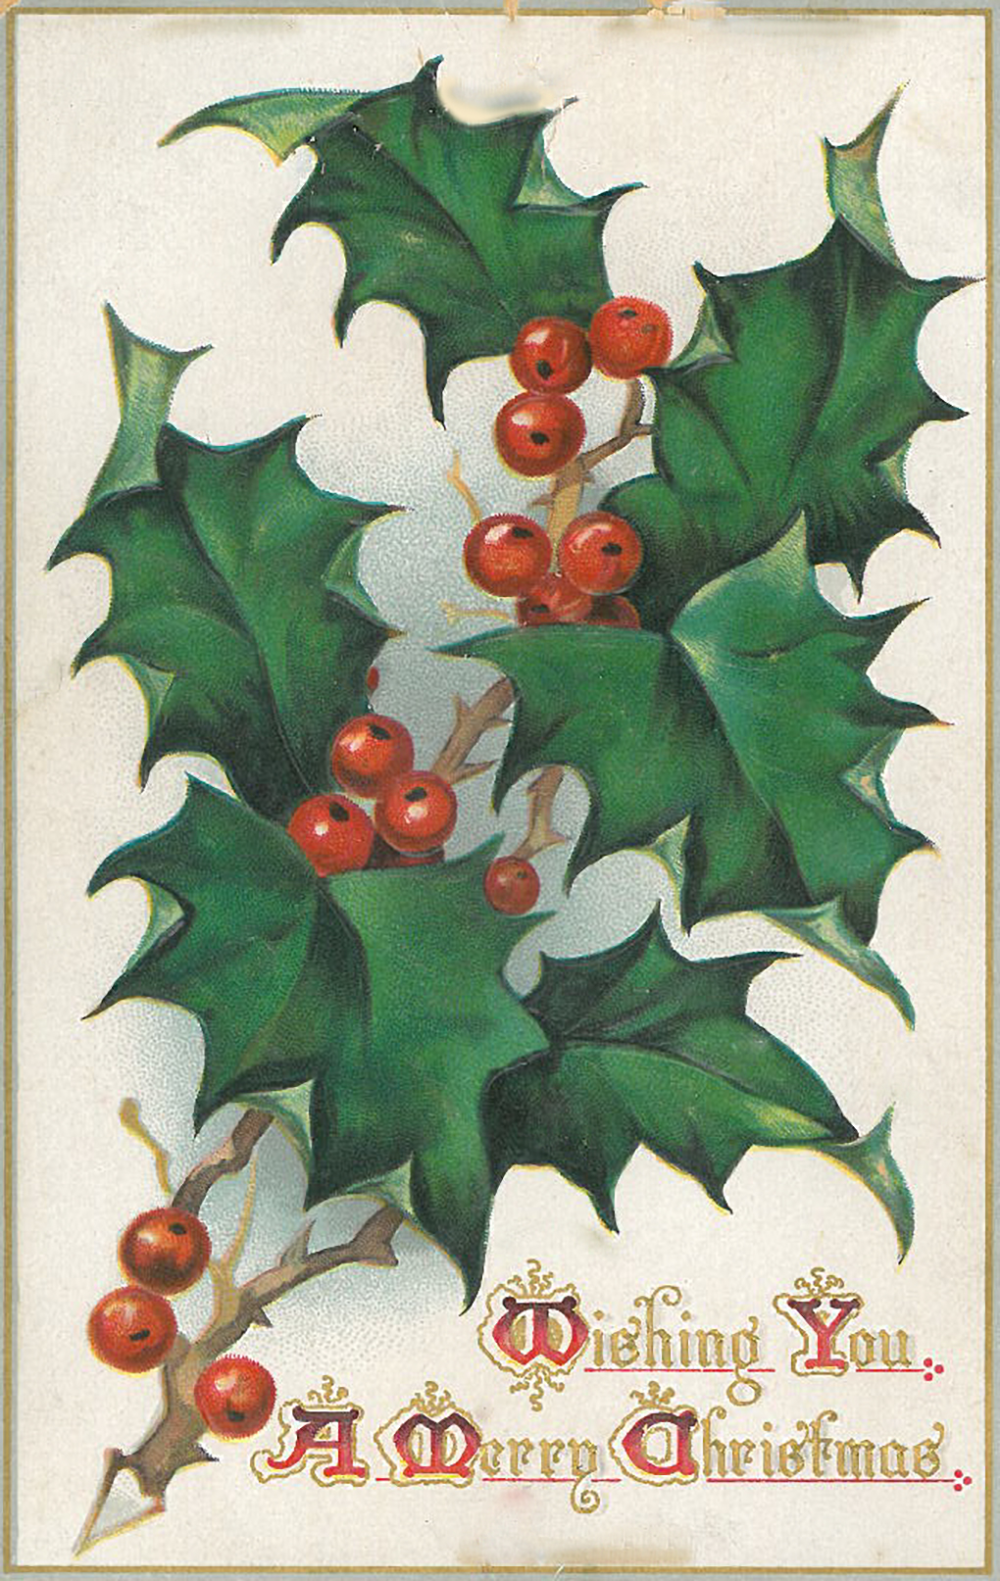 Vintage Christmas cards - American Greetings archives.png